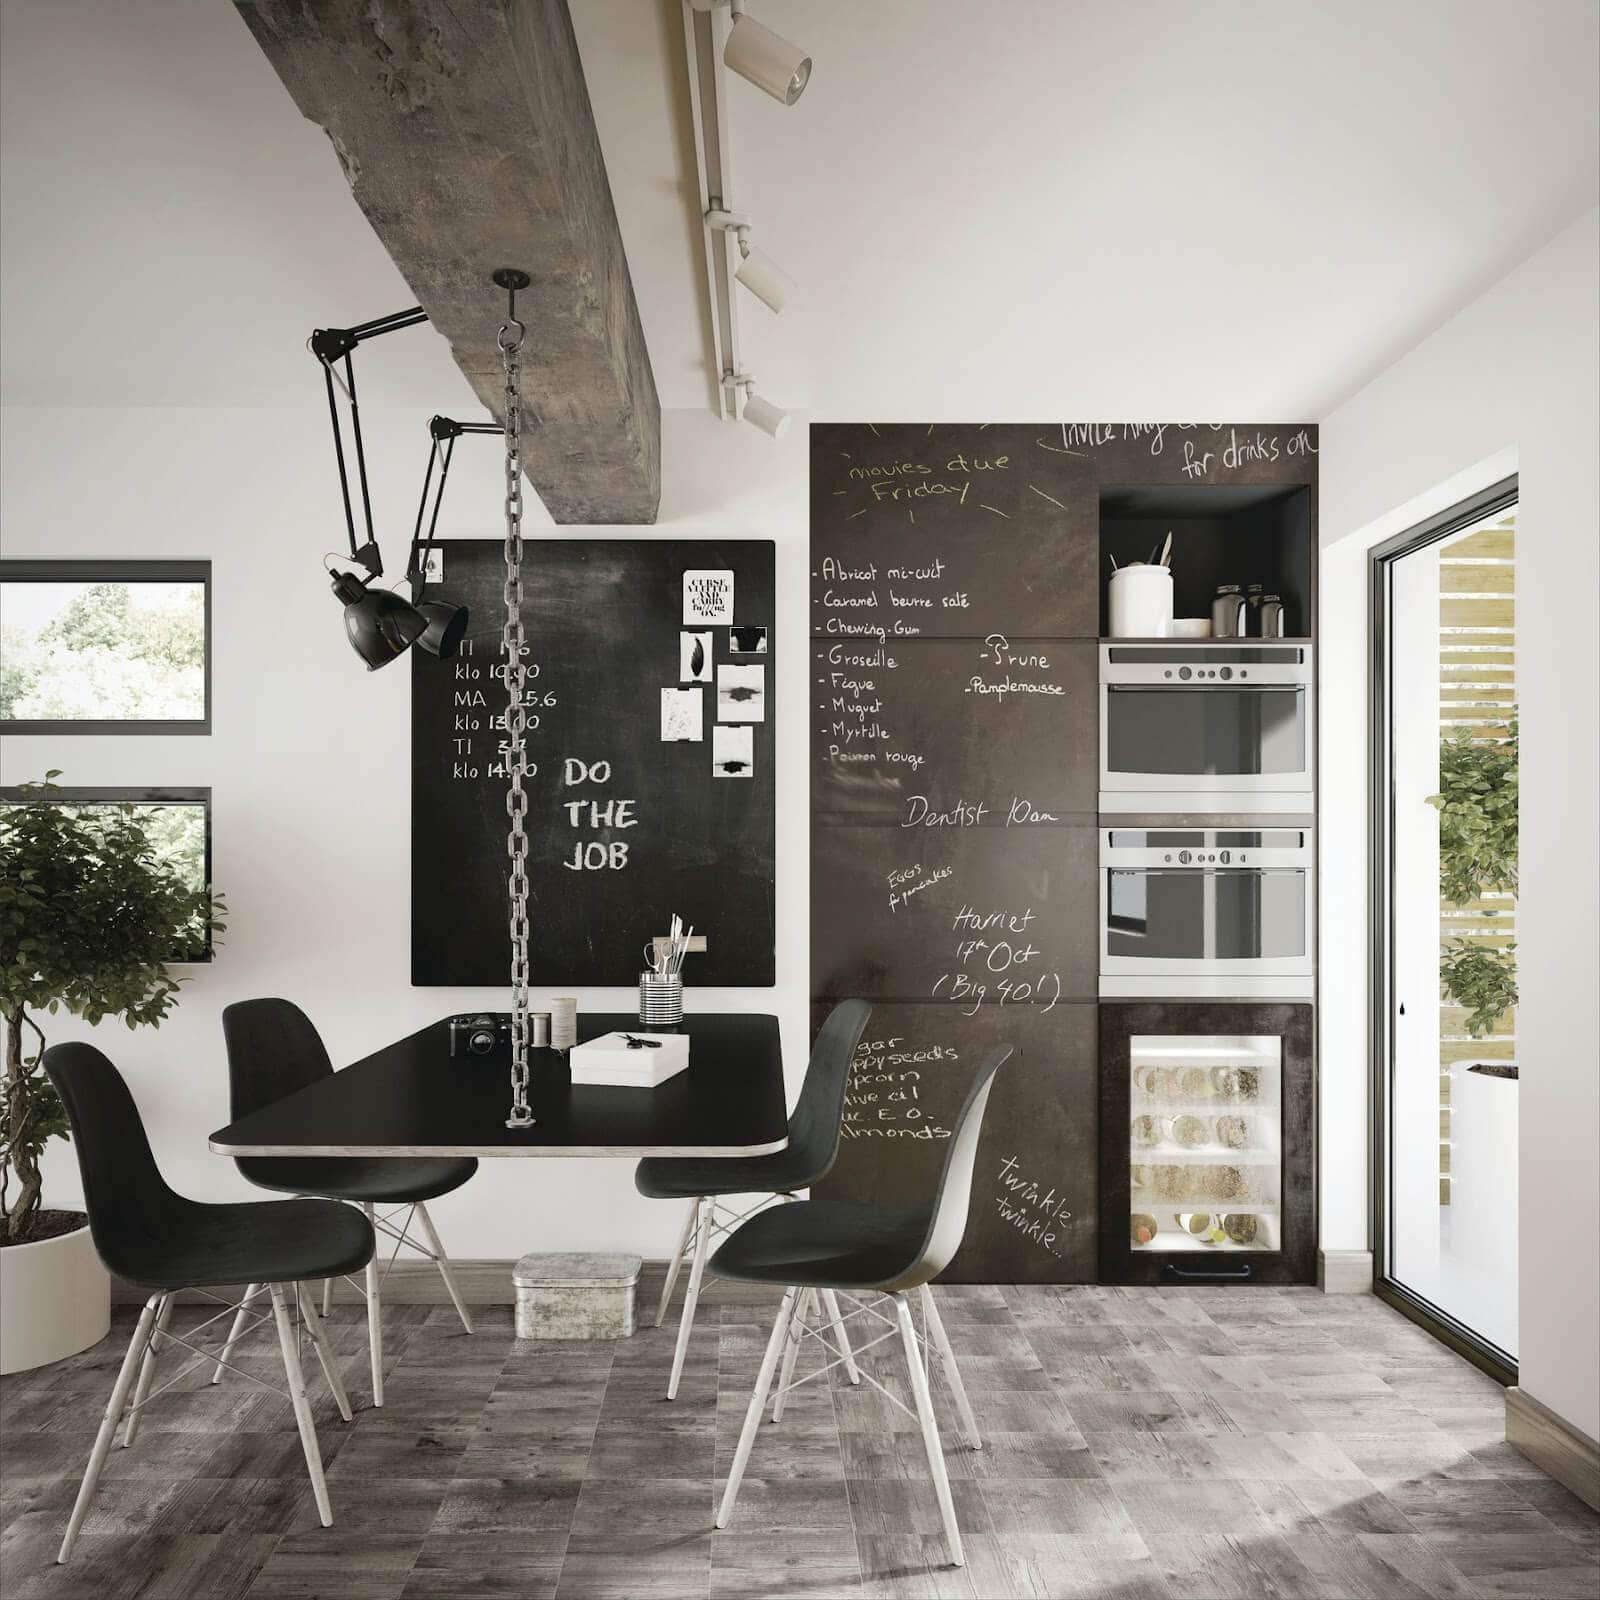 industrial-look home office space in the kitchen with gray ceramic tile flooring